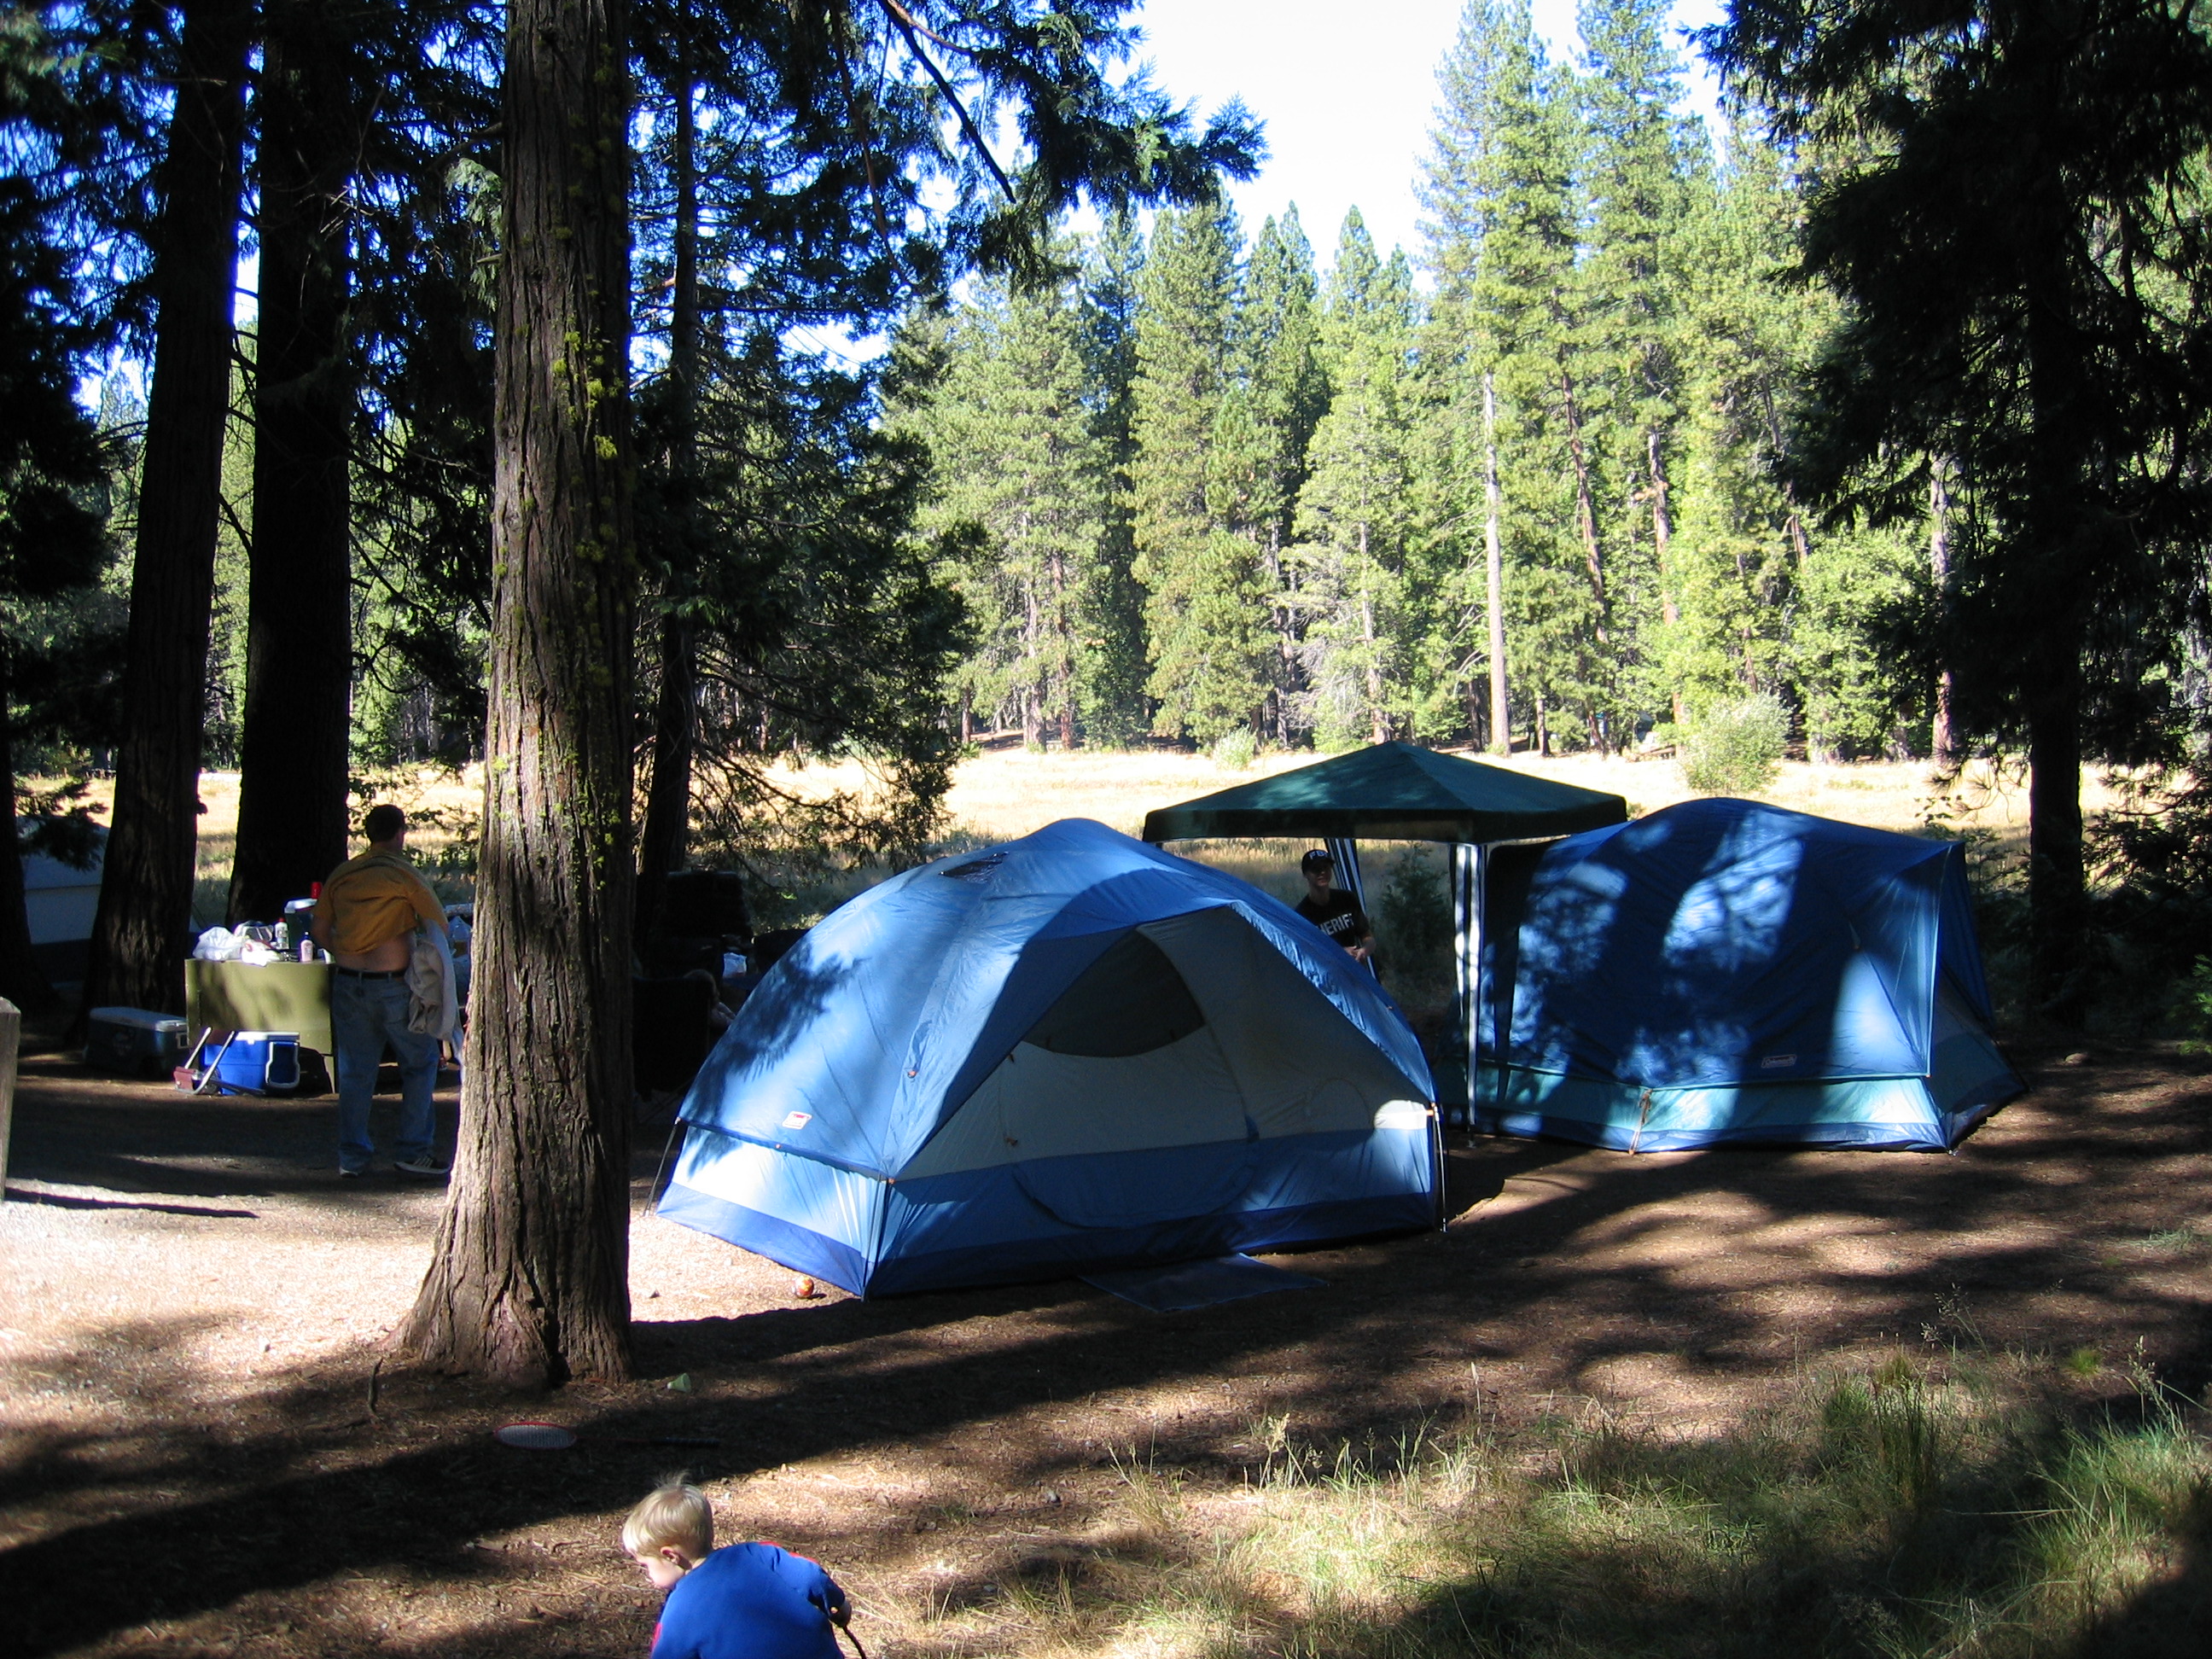 Camping trip picture